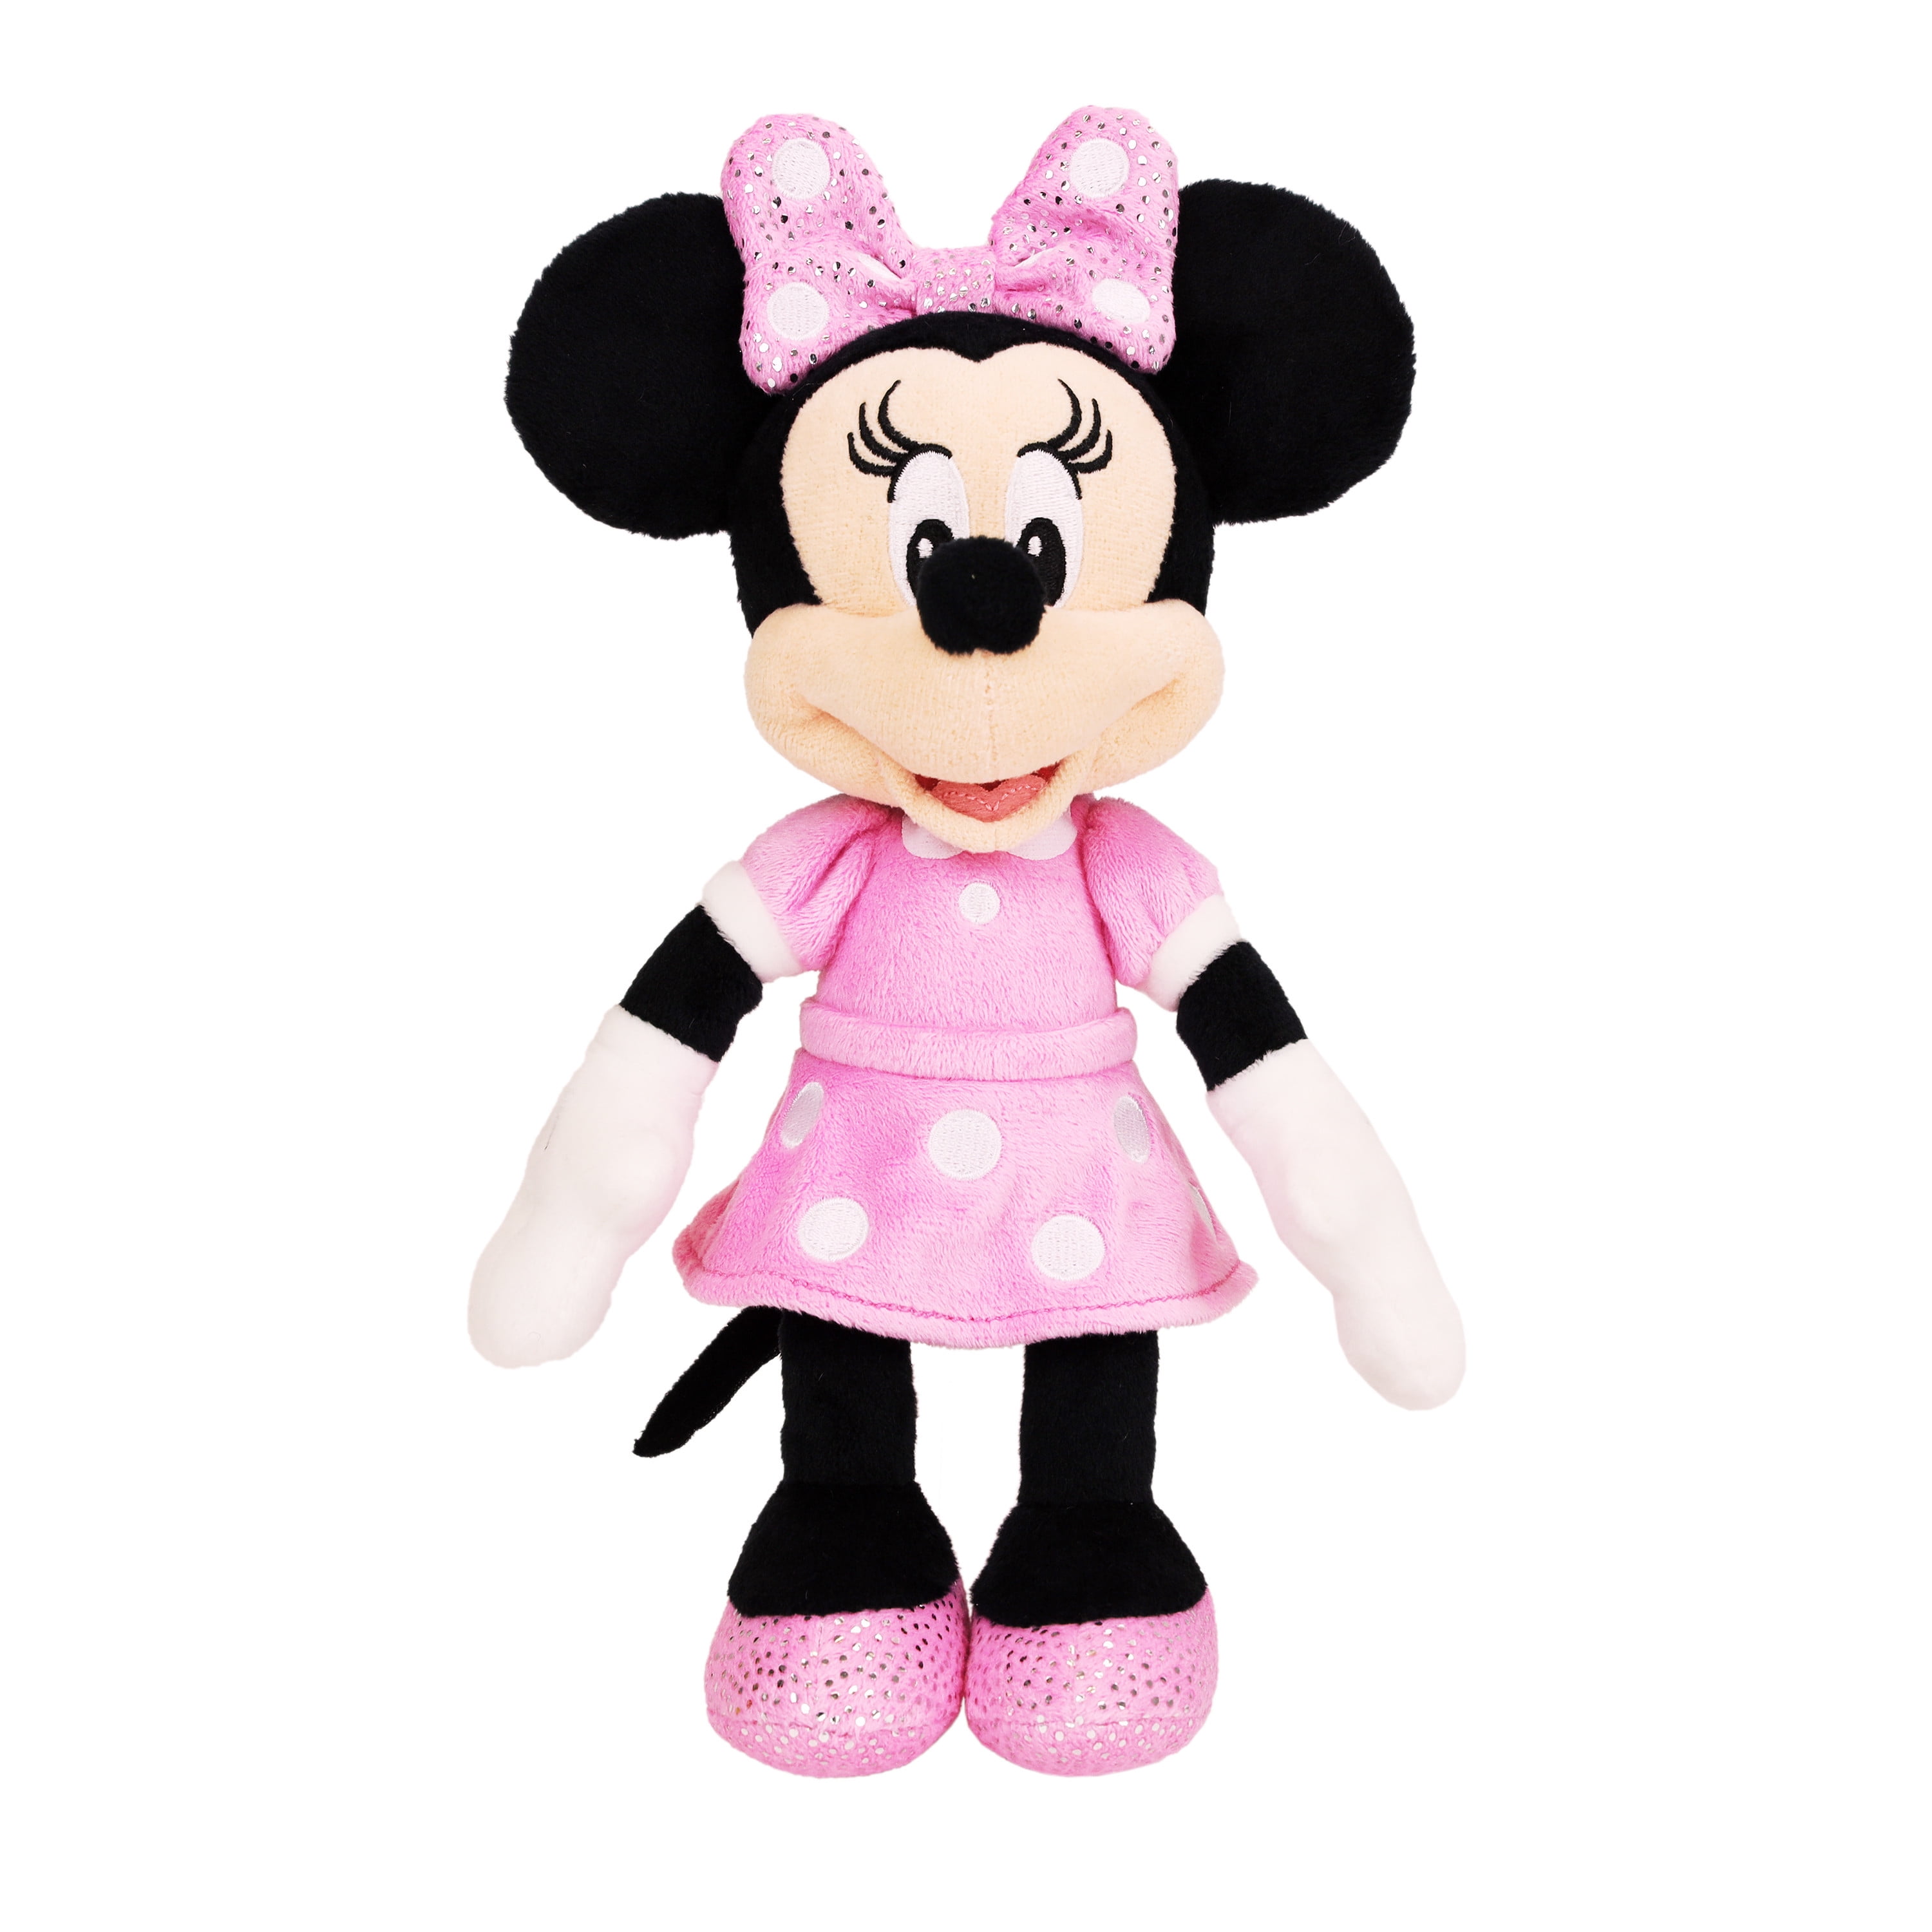 Disney Minnie Mouse 90 th Anniversary Edition Soft Plush Embroidered Toy 